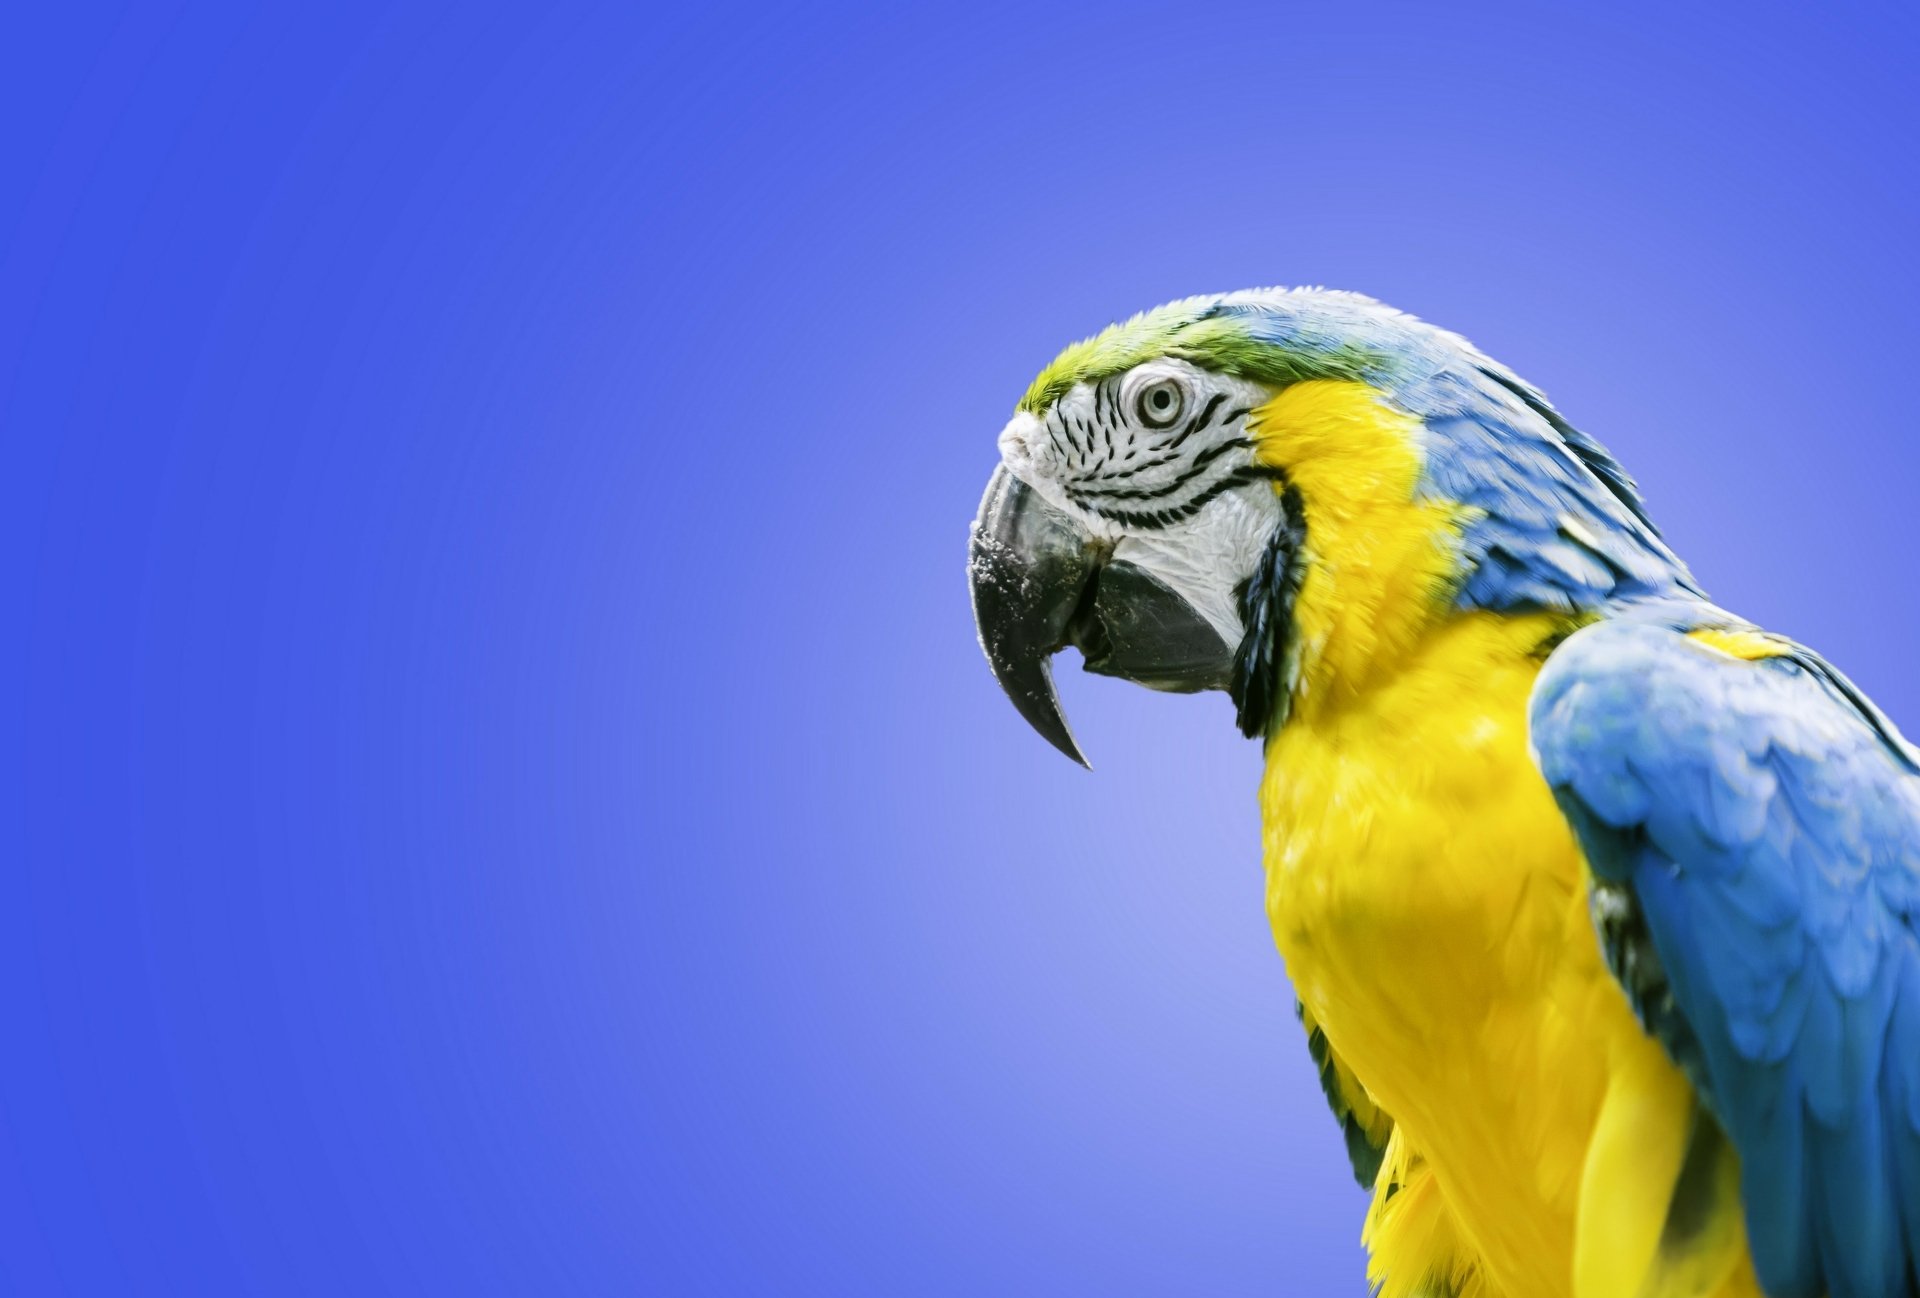 Download Parrot Macaw Animal Blue And Yellow Macaw Blue And Yellow